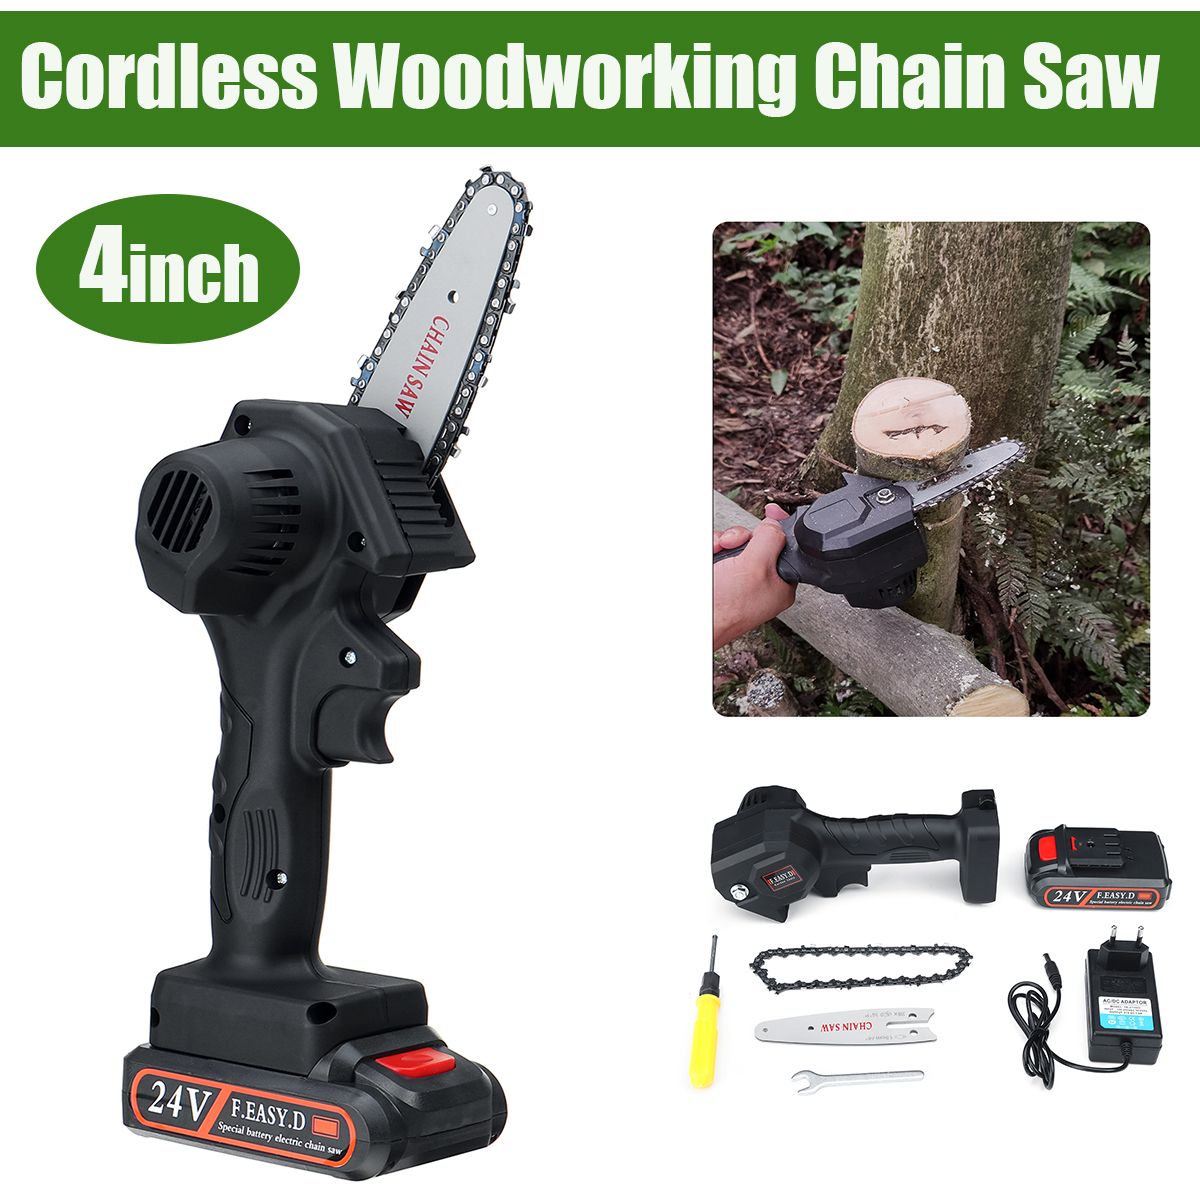 24V-Rechargeable-Cordless-Electric-Saw-Portable-Woodworking-Cutting-Tool-W-Battery-1740320